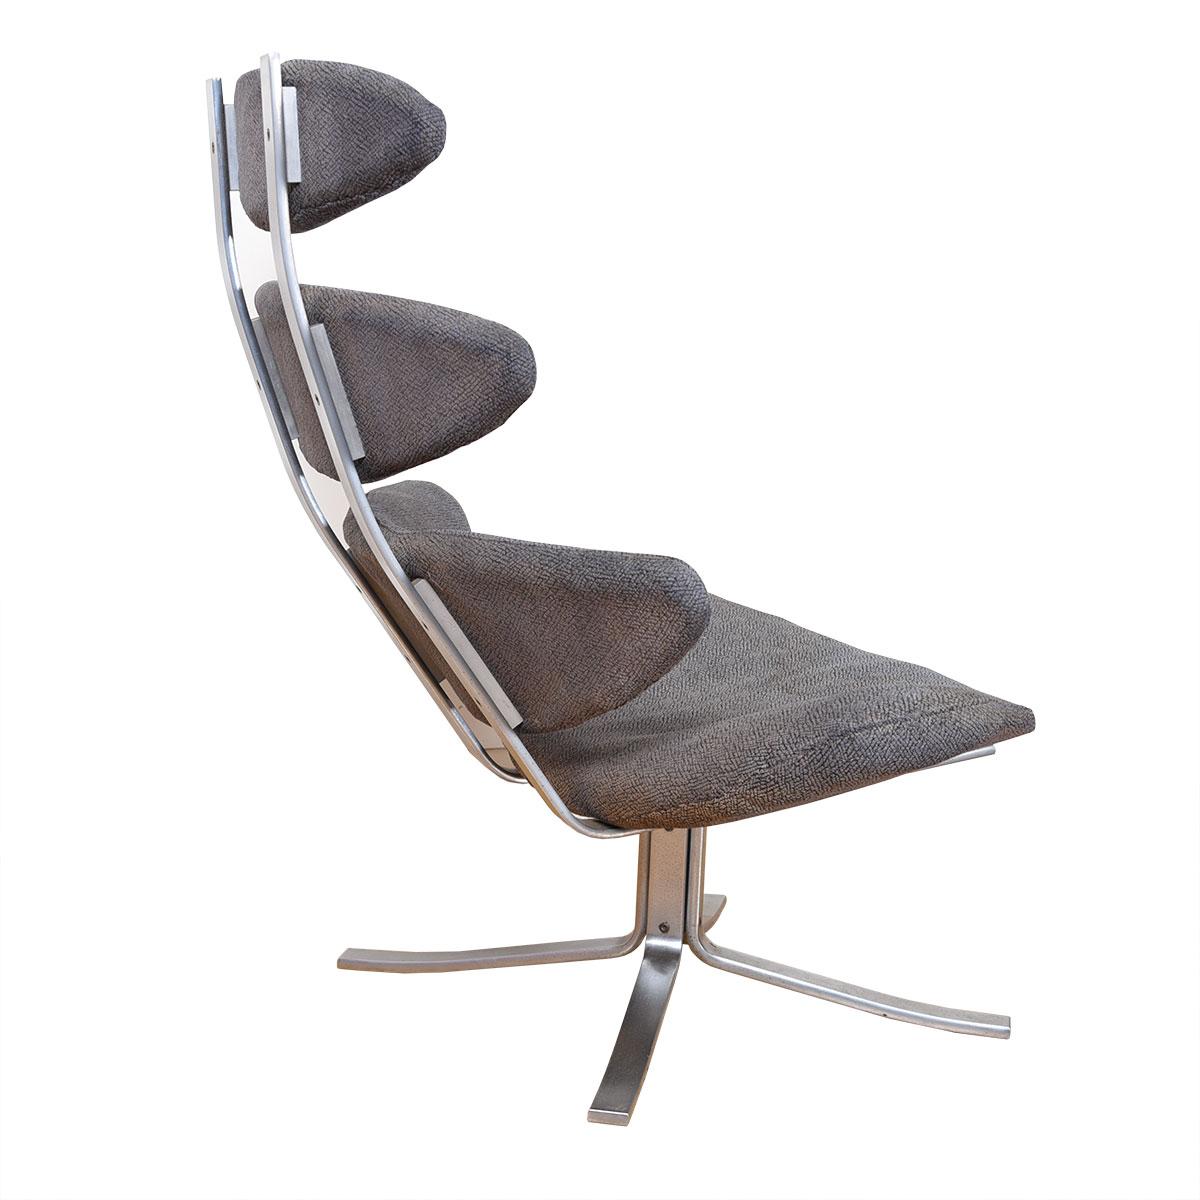 Danish Corona Chair by Poul Volther for Erik Jorgensen, 1964